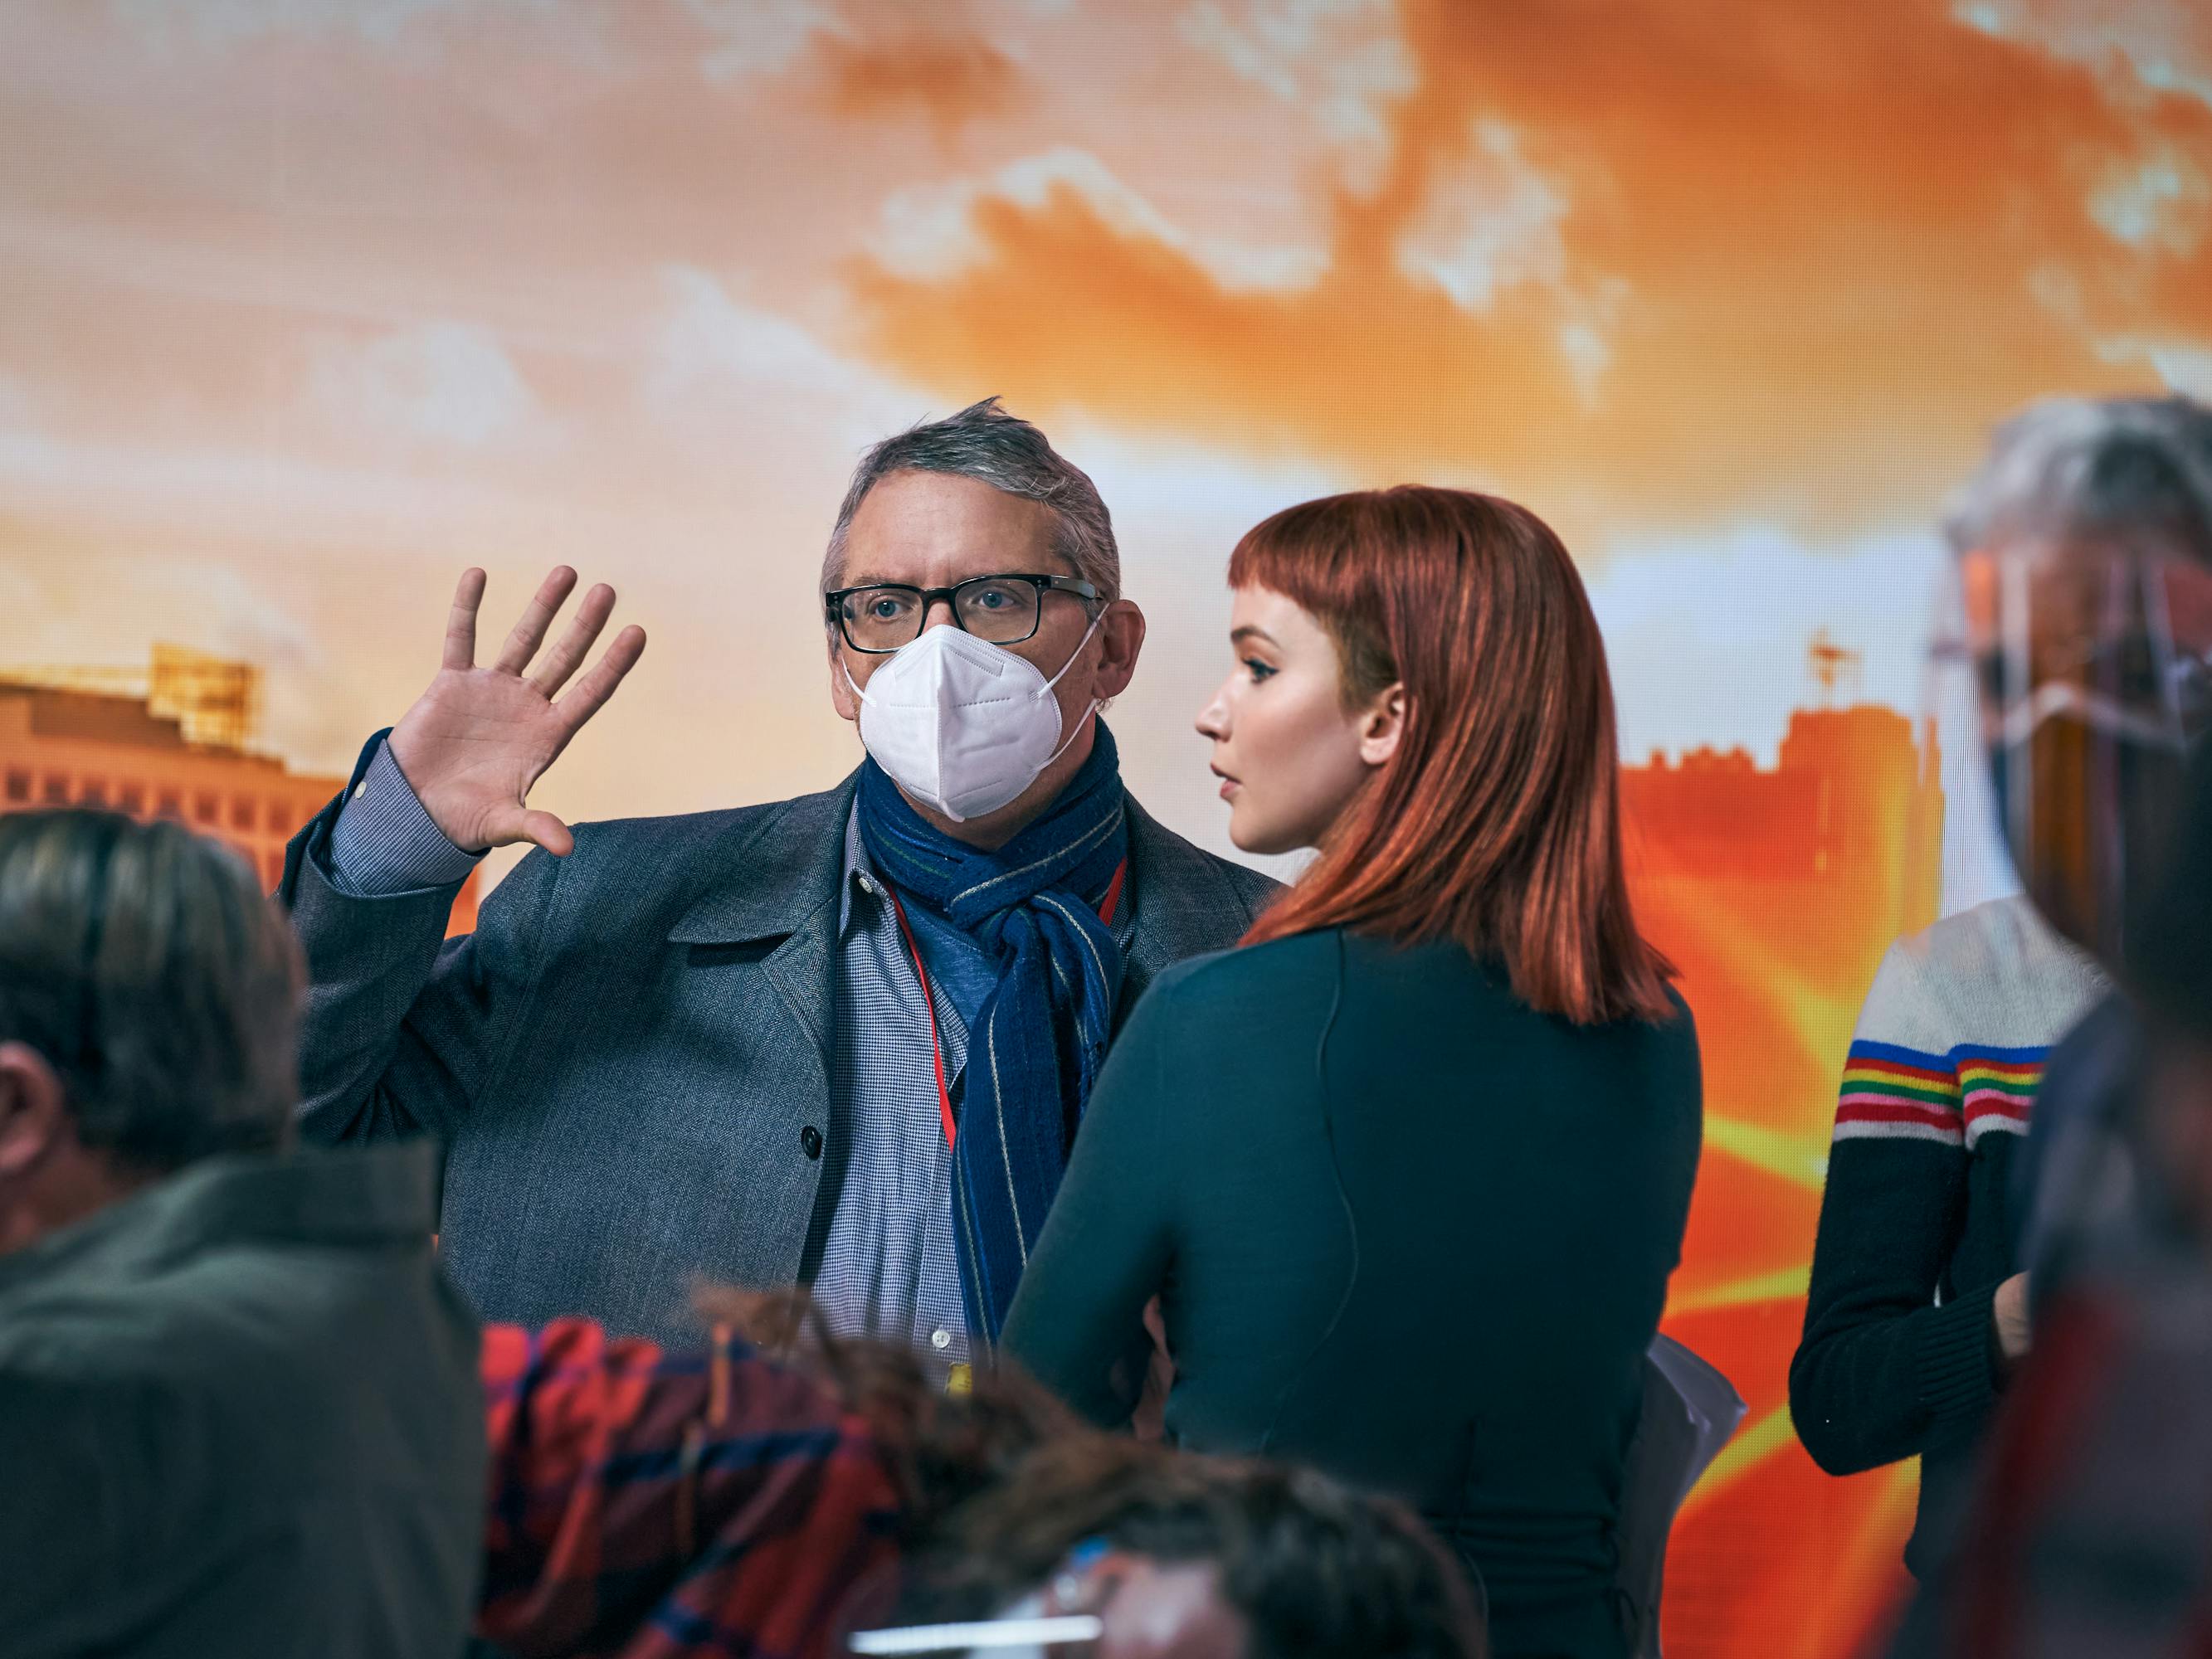 Adam McKay and Jennifer Lawrence stand on set. McKay wears a demin jacket, blue scarf, black glasses, and white mask. Lawrence wears a green shirt and has bright red hair. Other crew members mingle about in protective masks. Behind them is an orange-lit background.